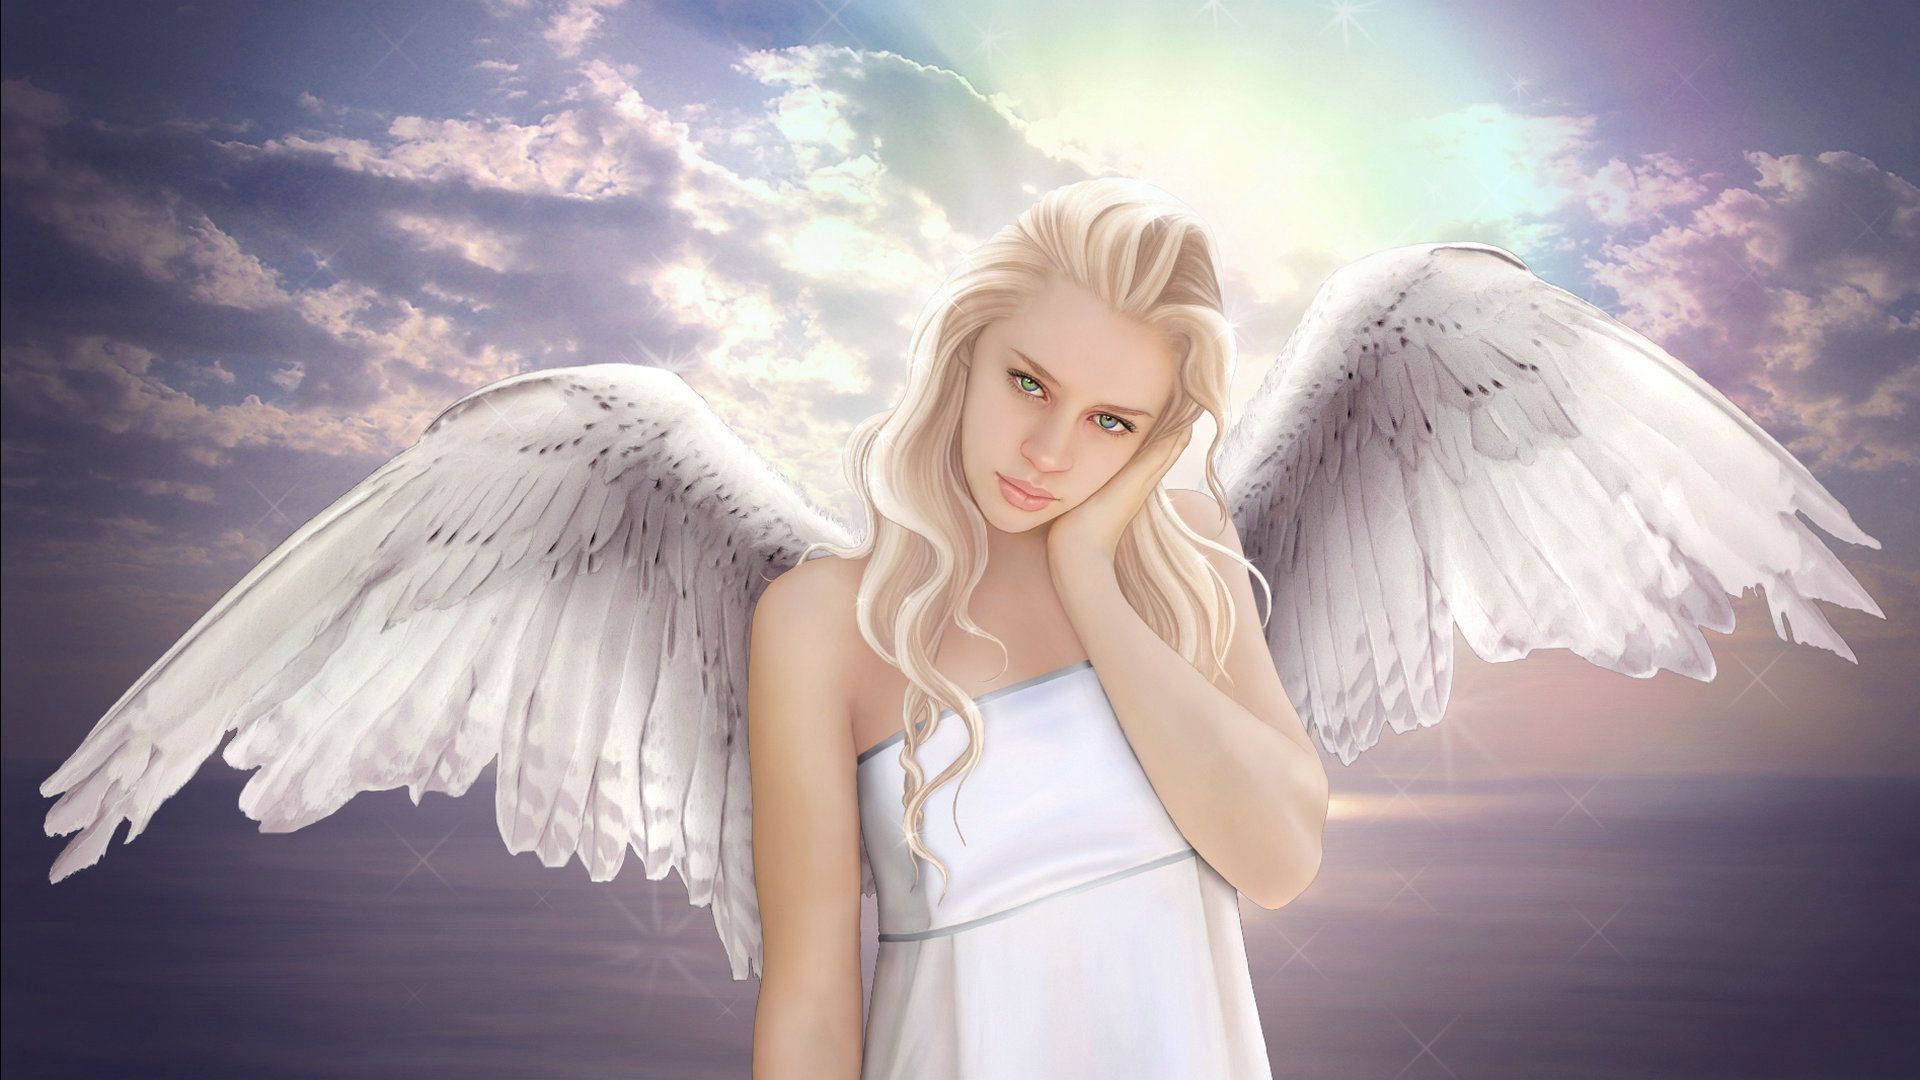 Beautiful Angels With Blonde Hair Wallpaper